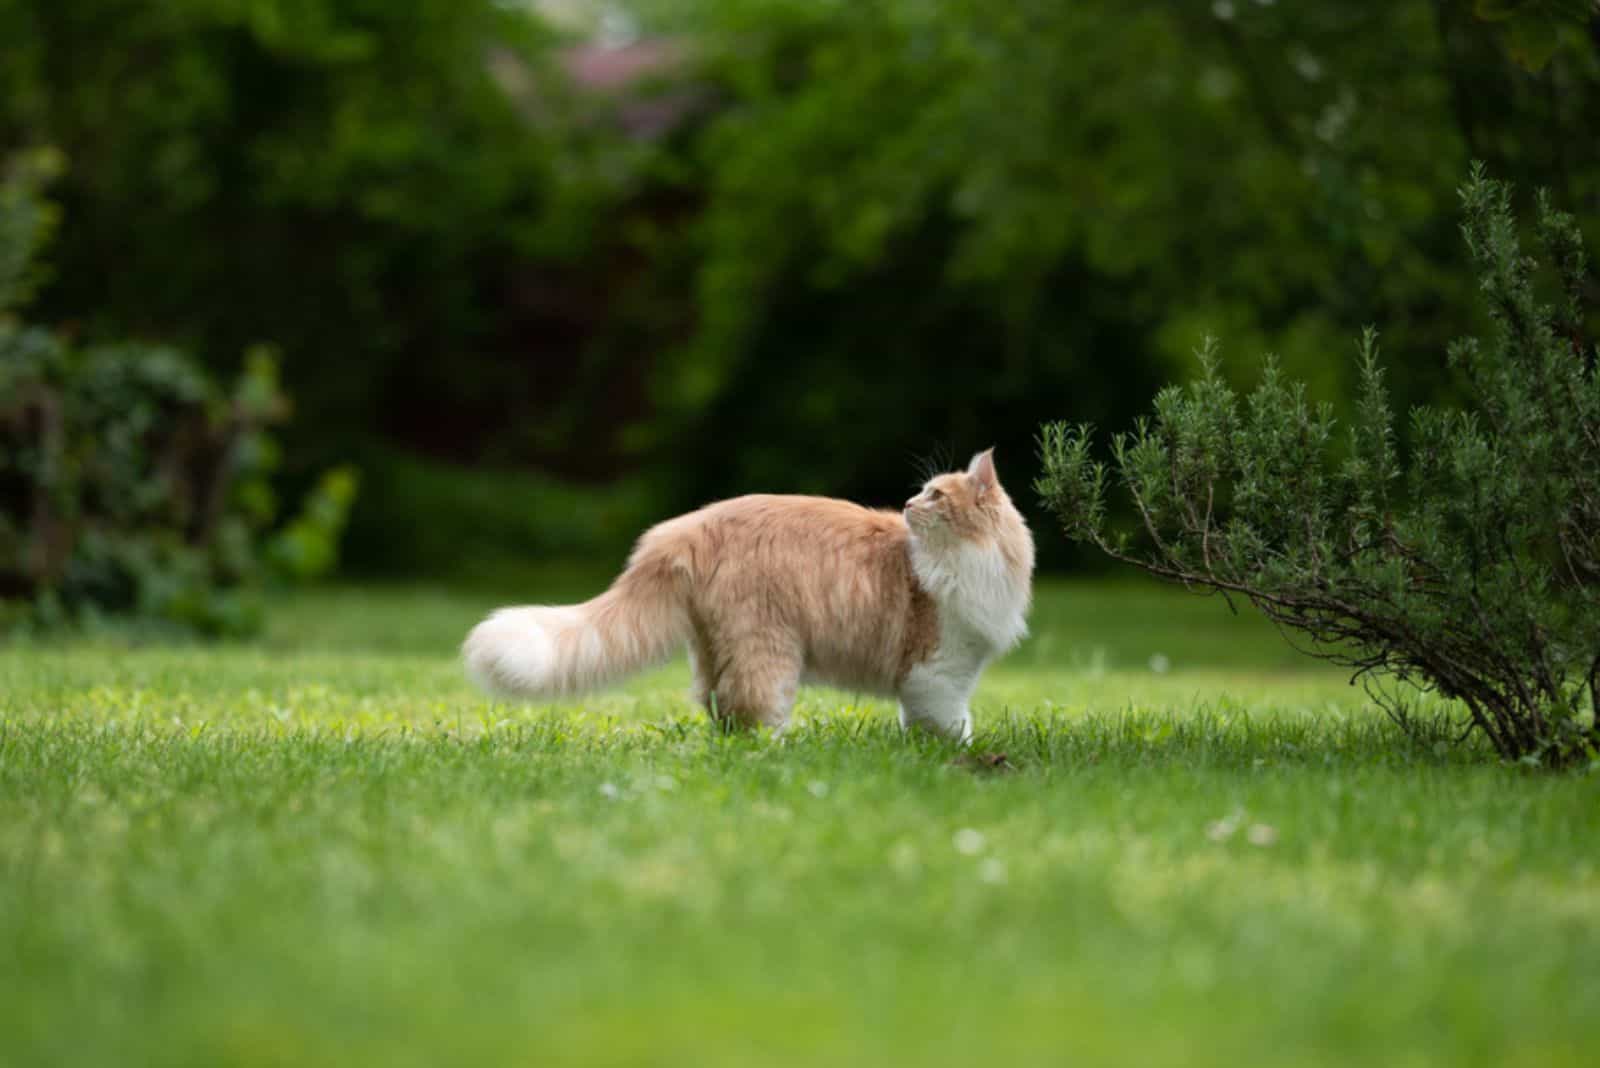 tabby ginger maine coon cat with fluffy tail standing on grass